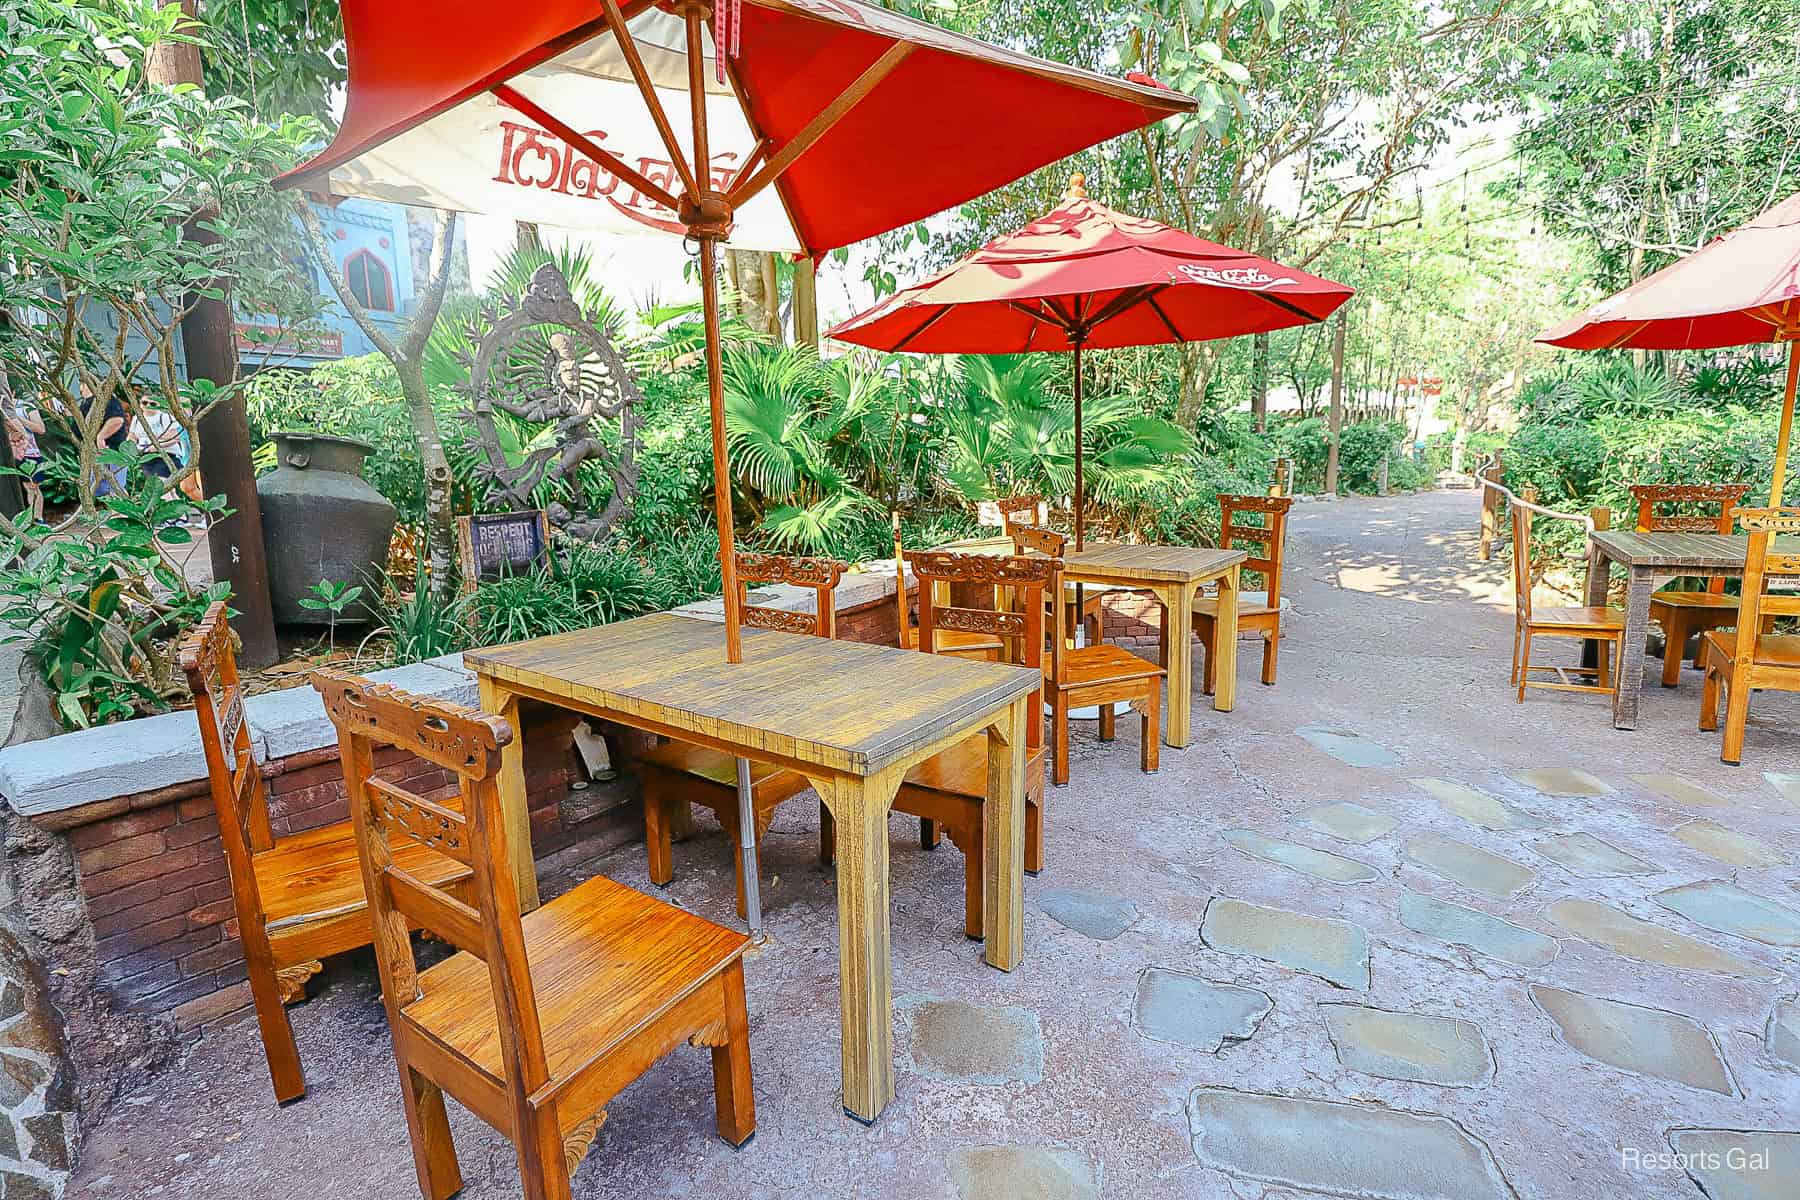 tables and chairs with umbrellas across the walkway from Yak and Yeti Local Foods Cafe